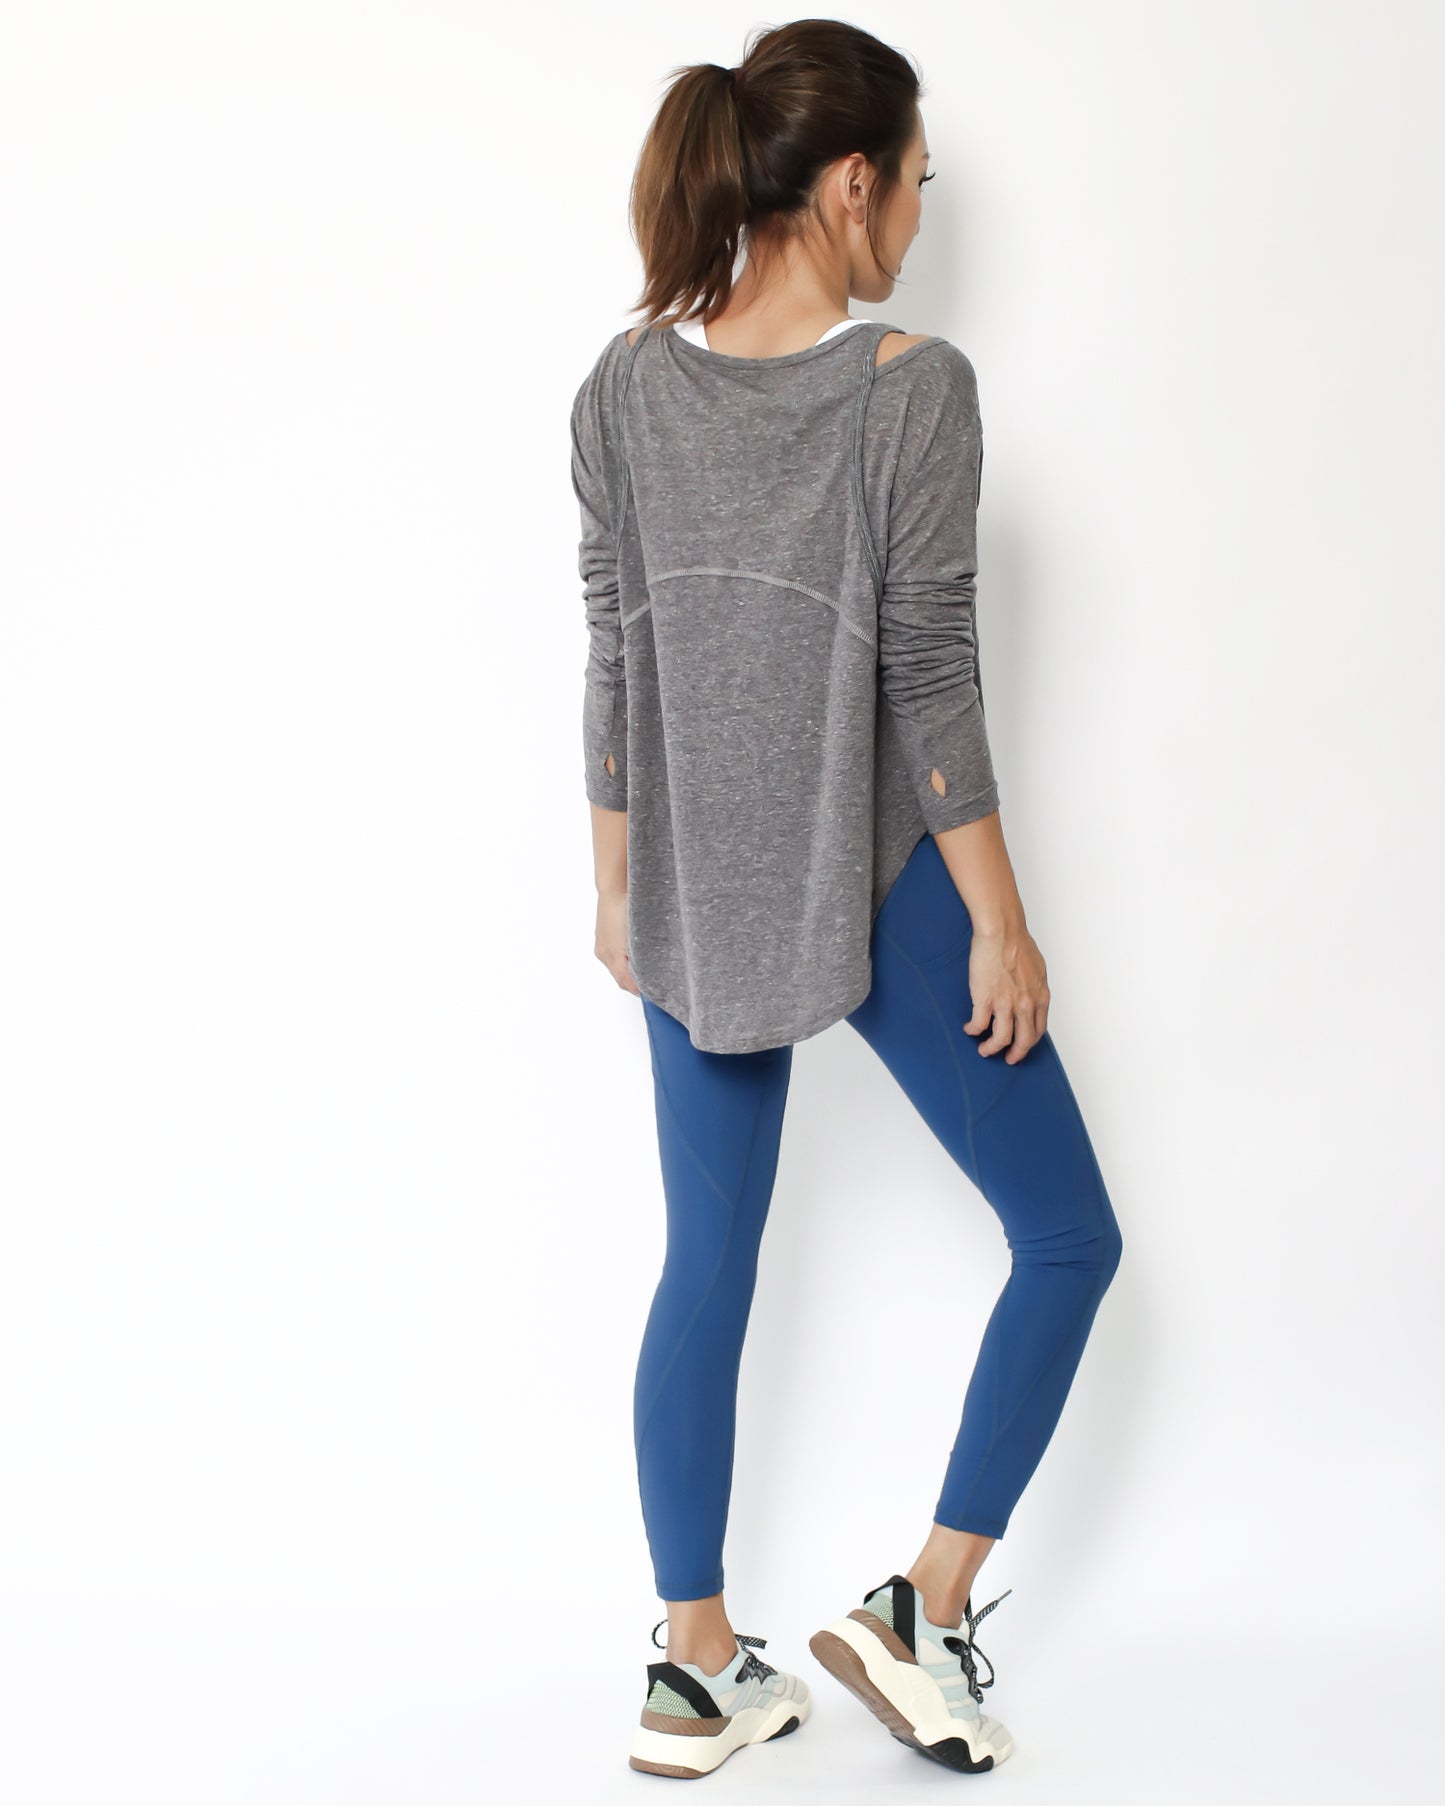 marble grey cutout back sports top *pre-order*